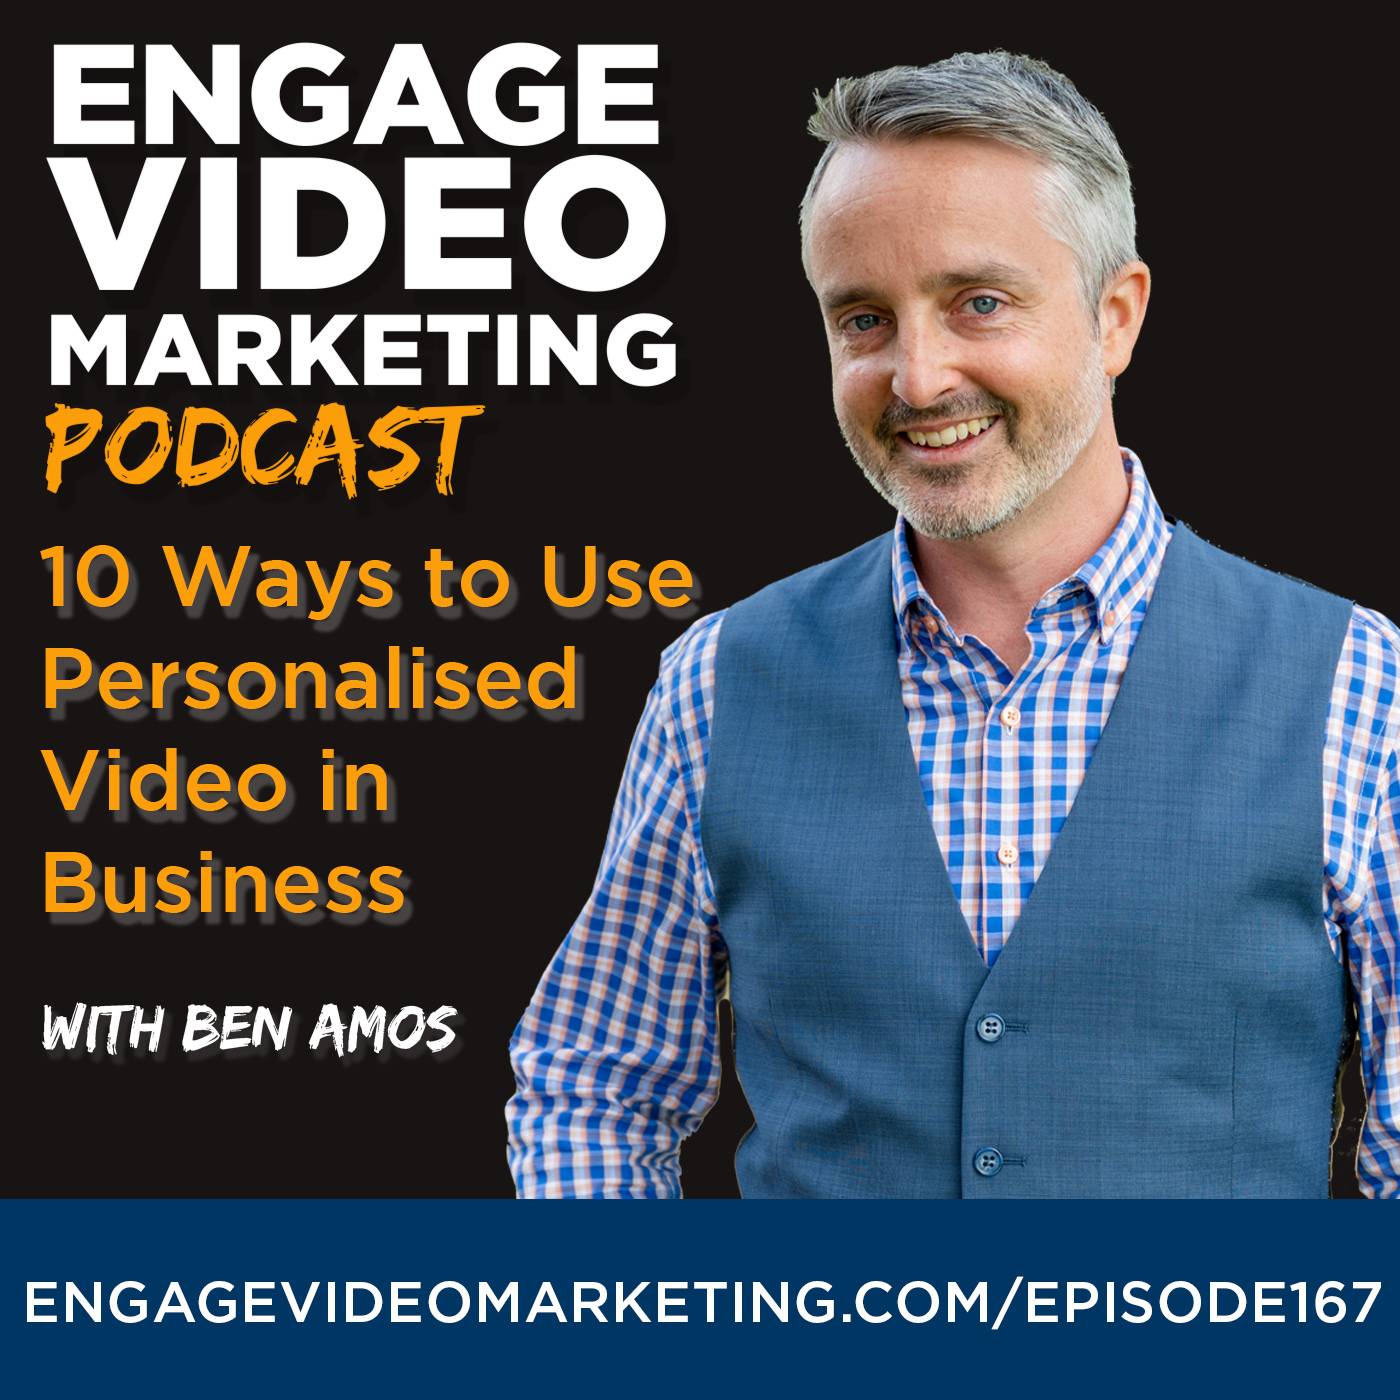 10 Ways to Use Personalised Video in Business with Ben Amos